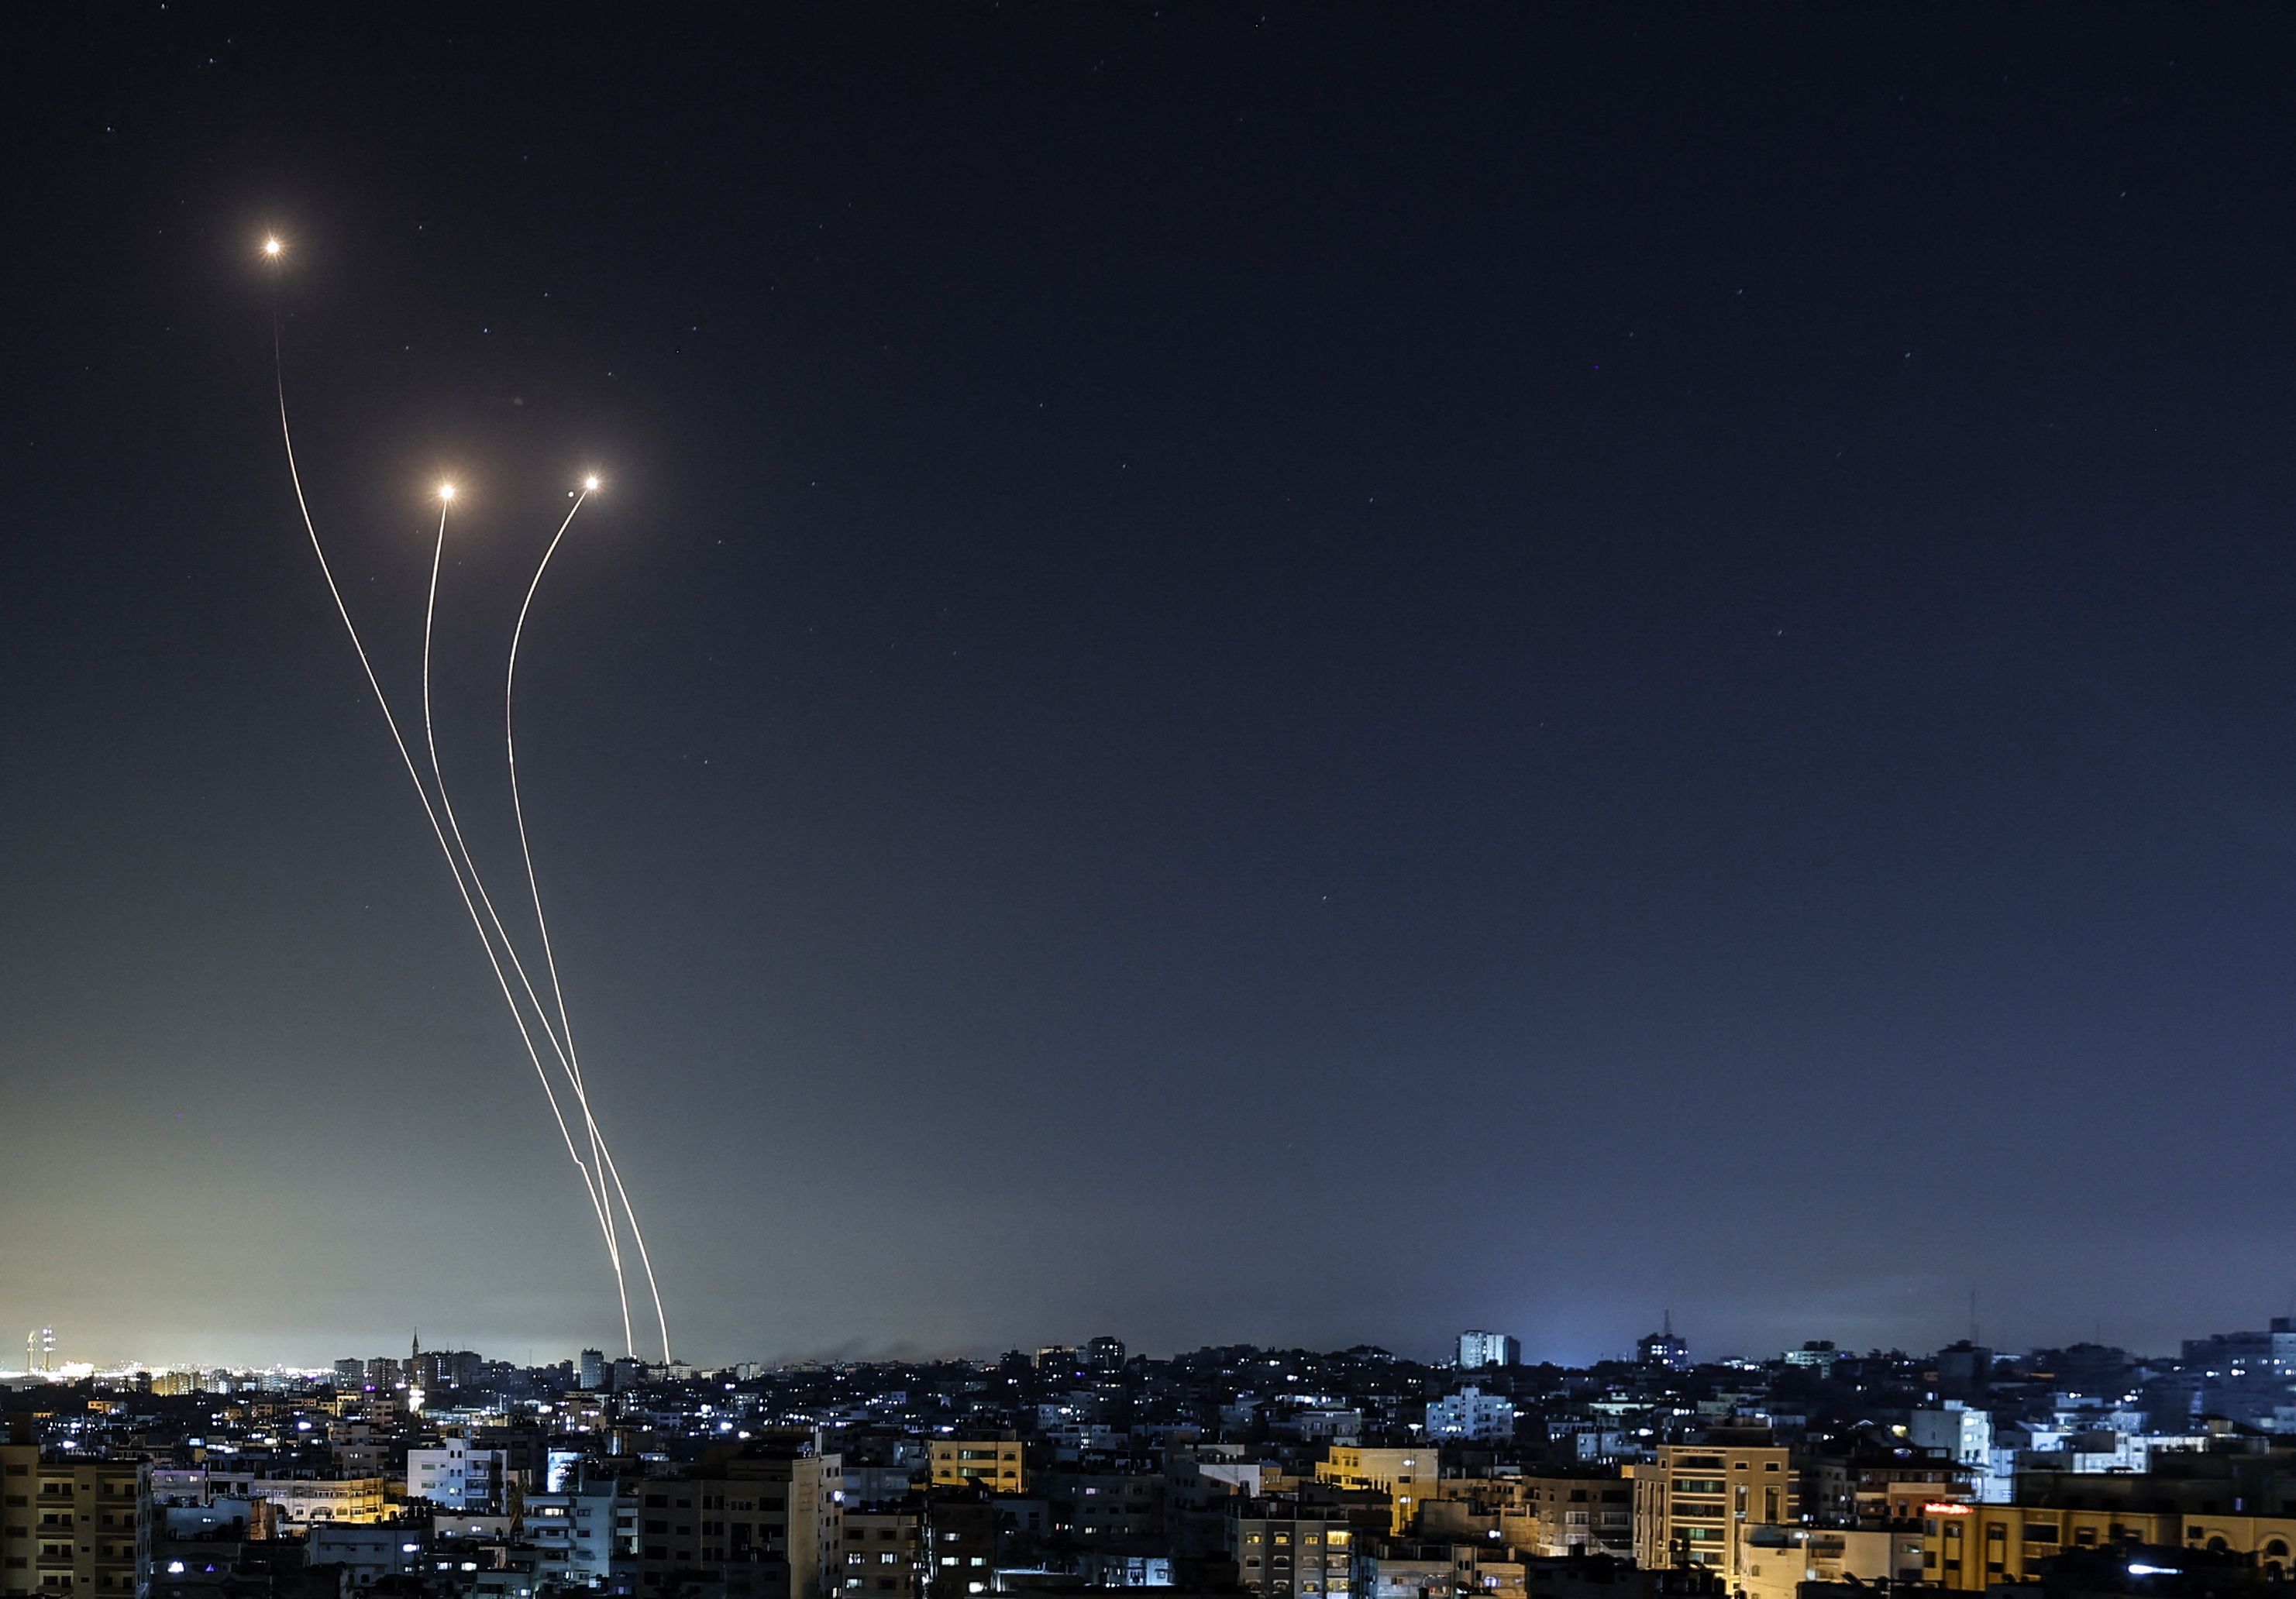 A streak of light appears as Israel's Iron Dome anti-missile system intercepts rockets launched from the Gaza Strip, early on May 17